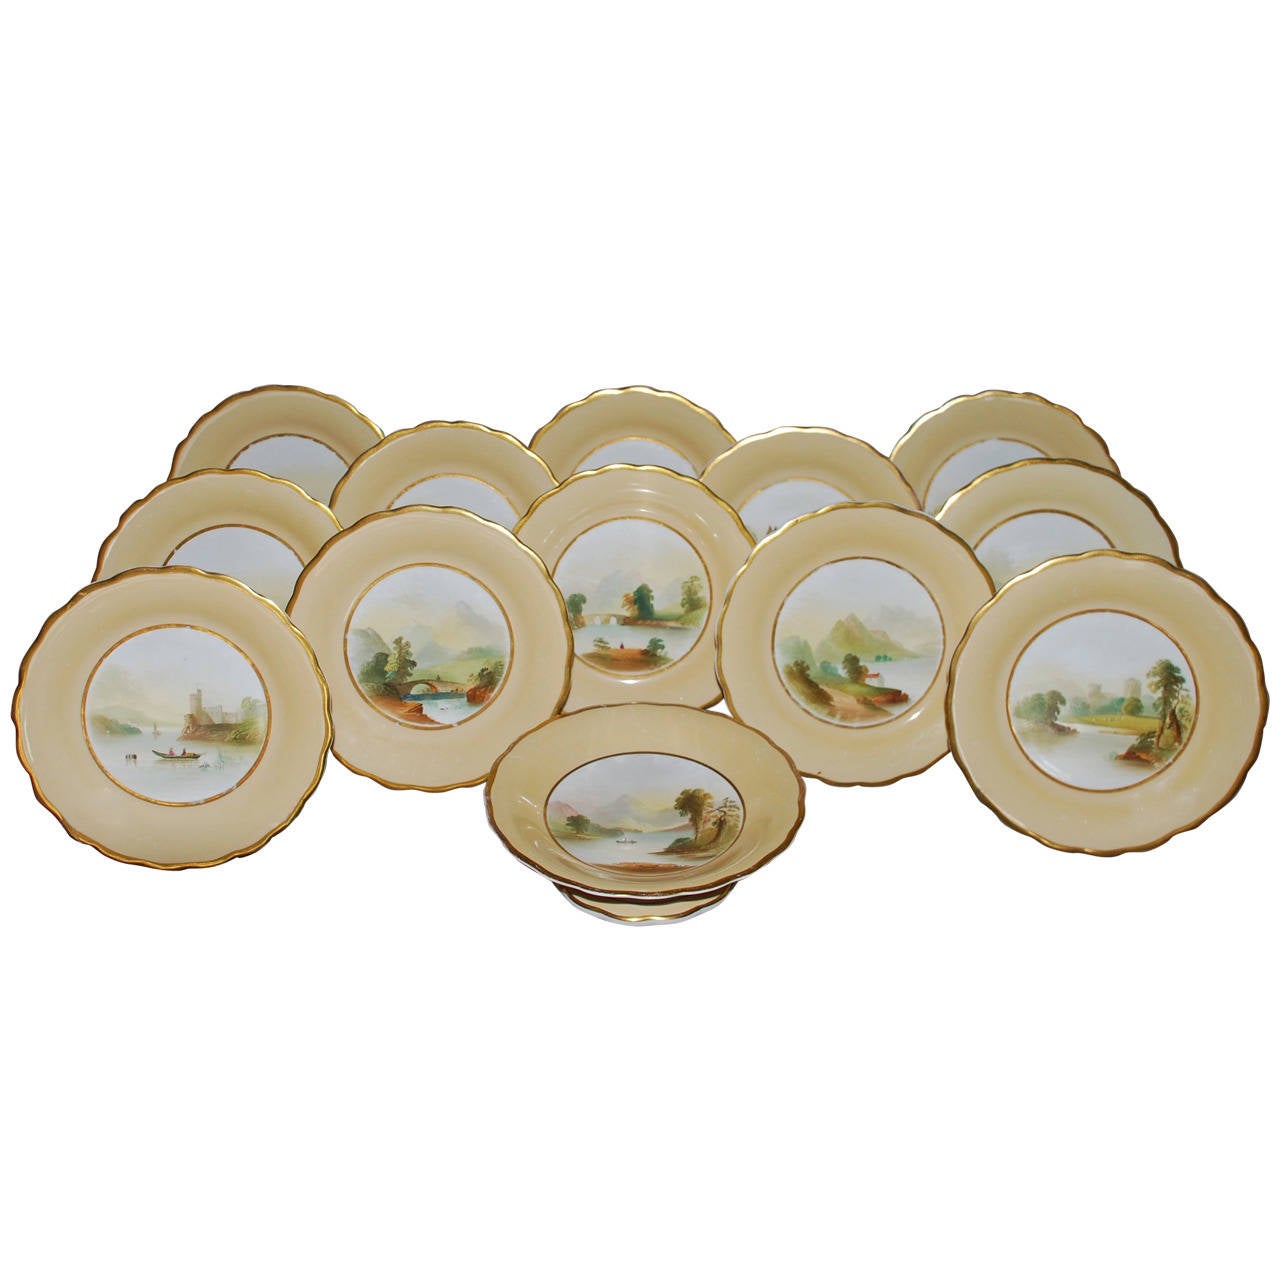 Set of 12 gilt-rimmed dessert plates and cake stand with Scottish scenes. The scalloped-edge and gilt plates with stand feature hand-painted Scottish scenes with various famous castles and their locations on reverse; perfect for a Burns Night